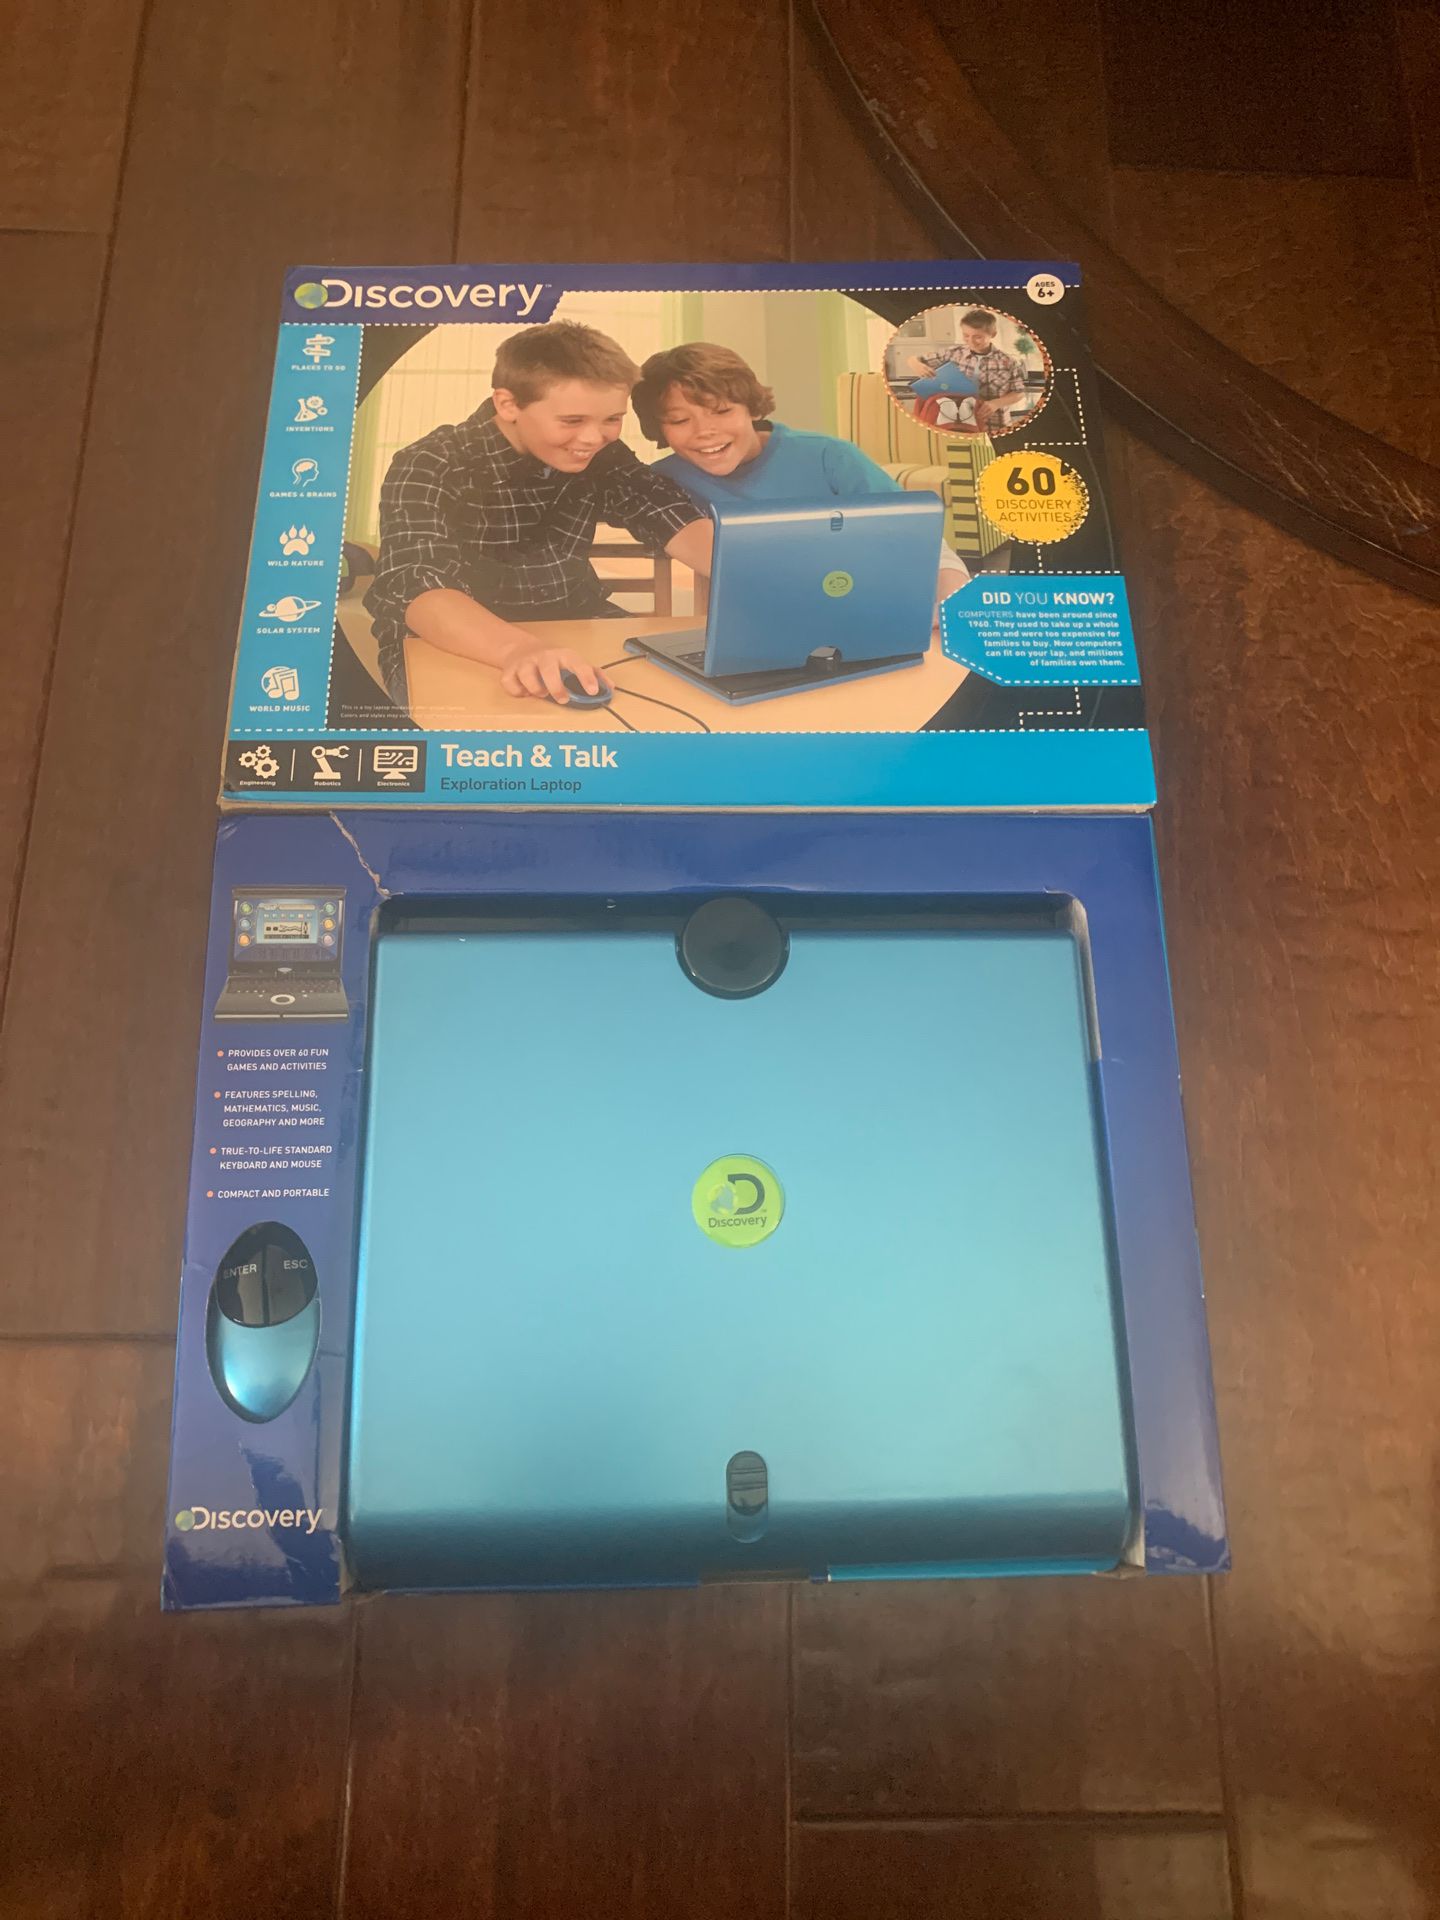 Discovery teach and talk kids laptop